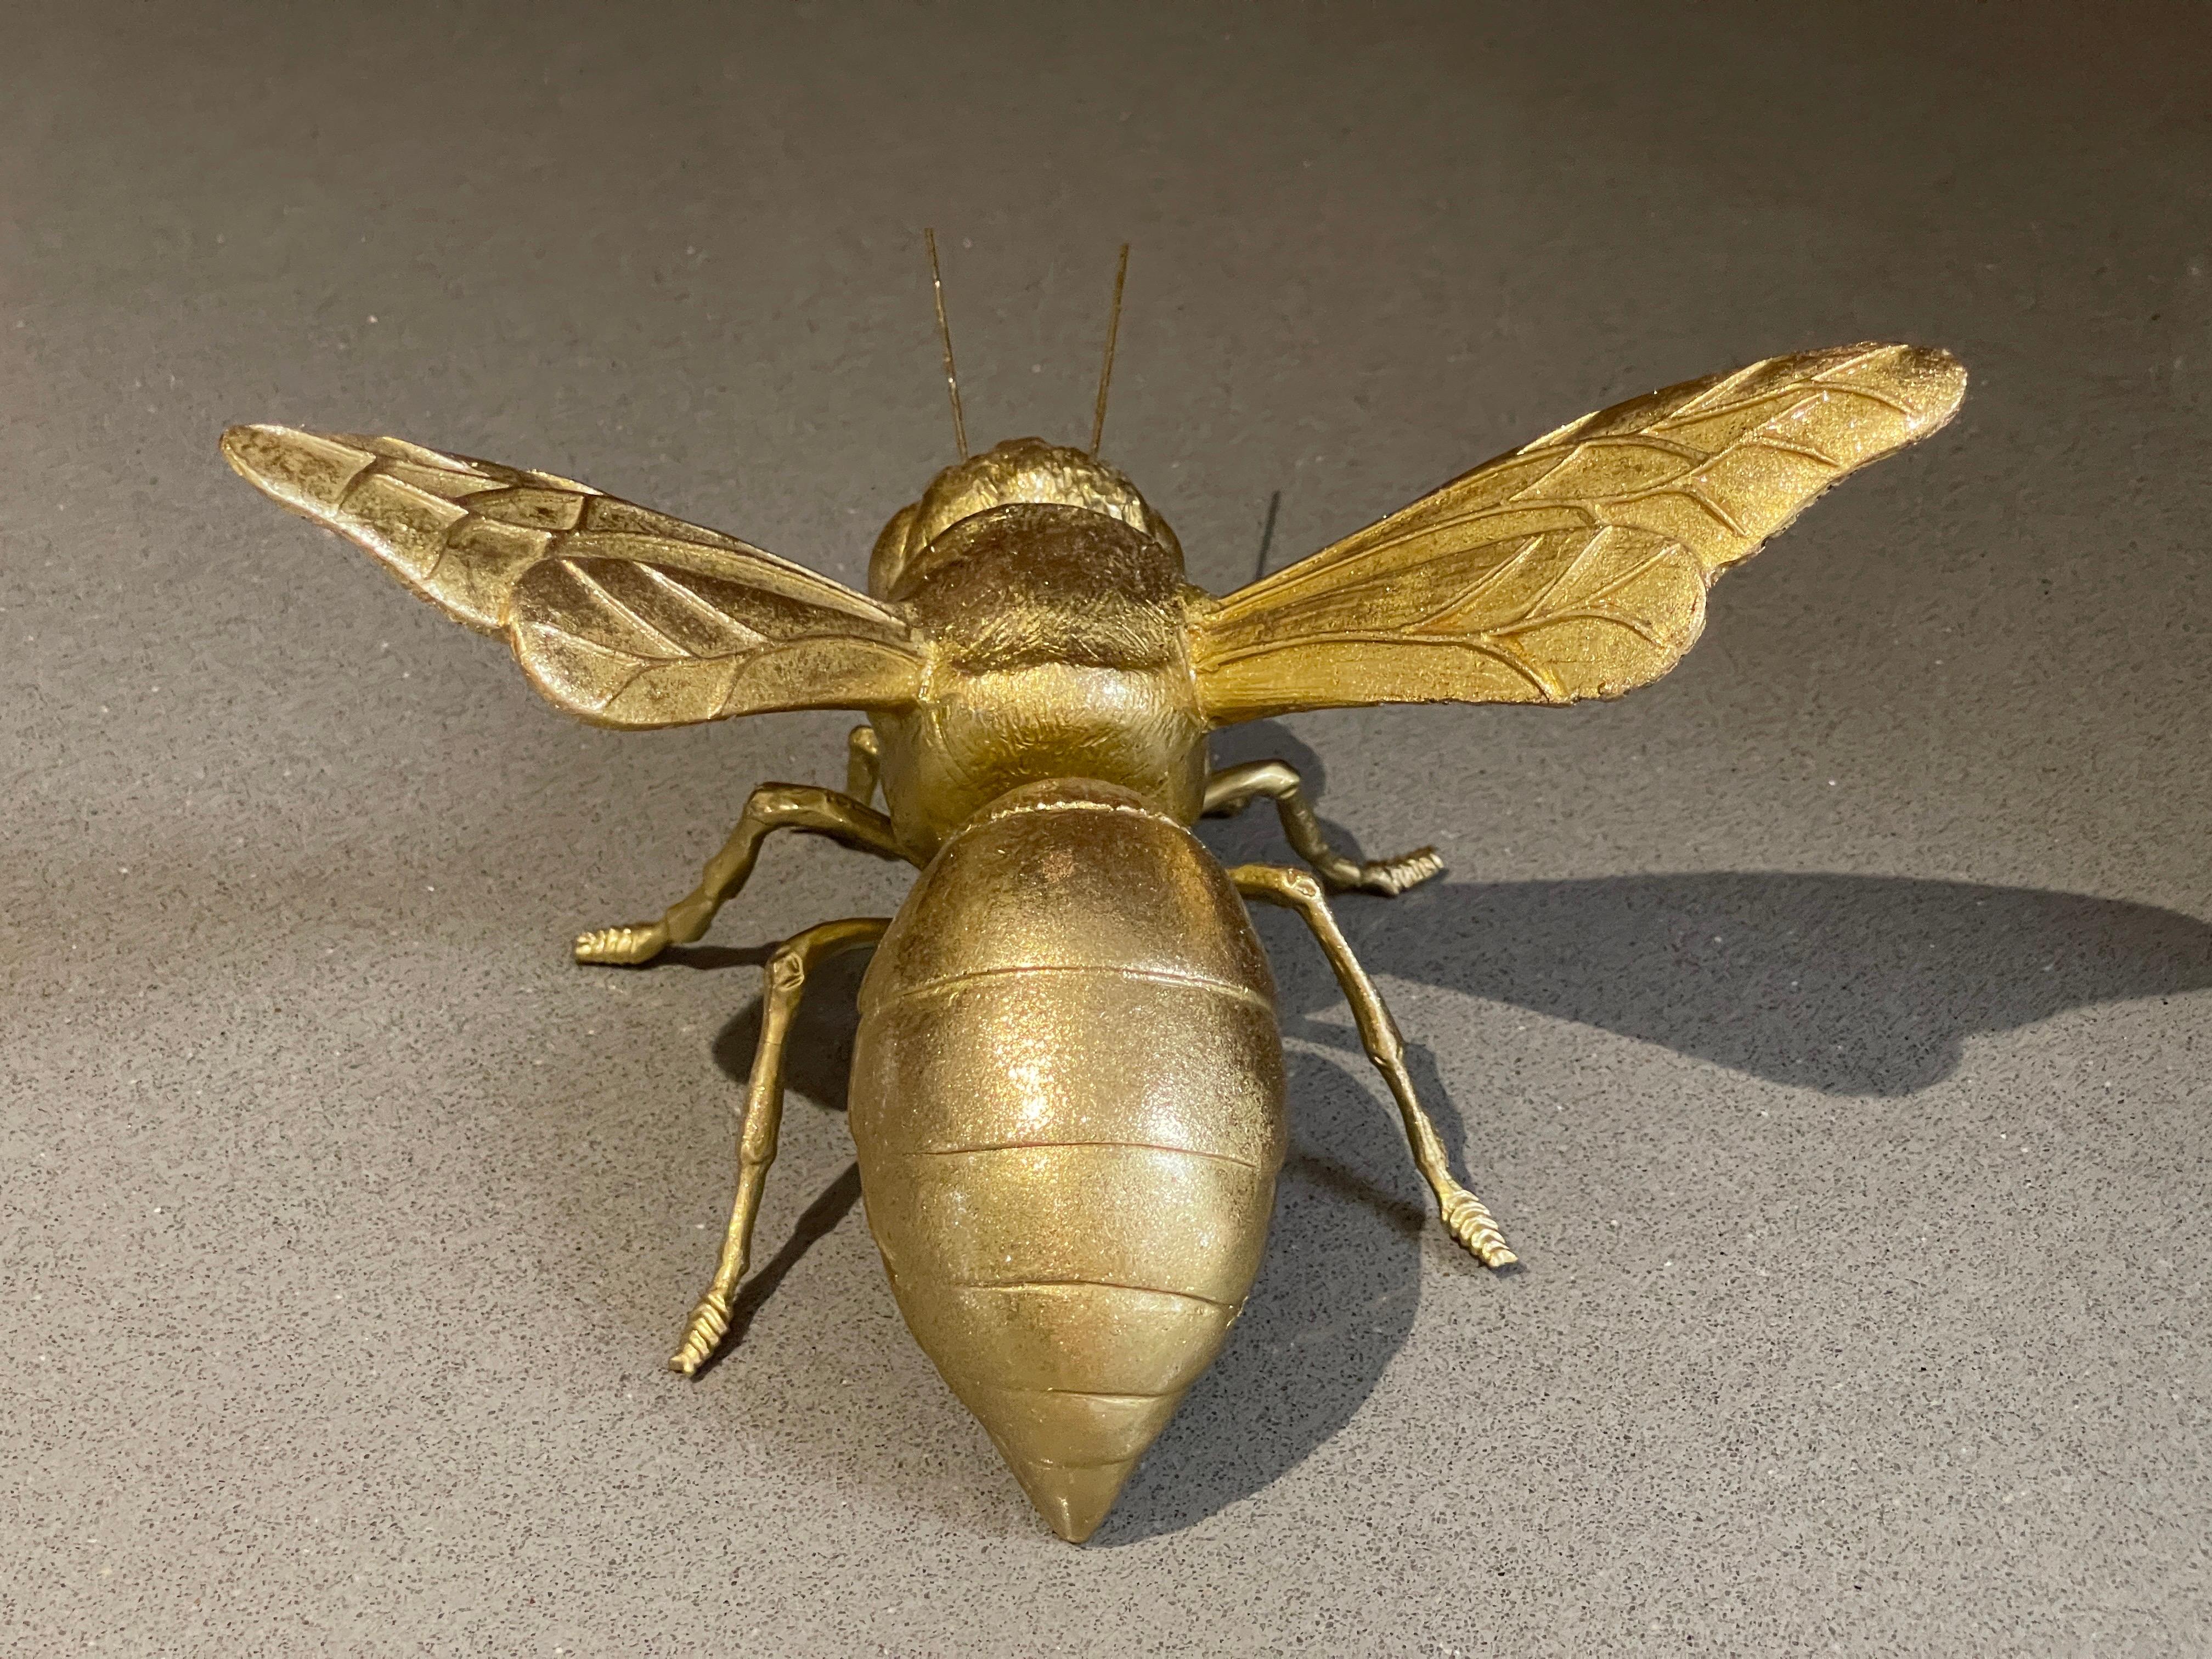 Gold Leaf Vintage Decorative Gold Bee Ornament Bumble Bee Sculpture LUXURY ORNAMENT GOLD  For Sale